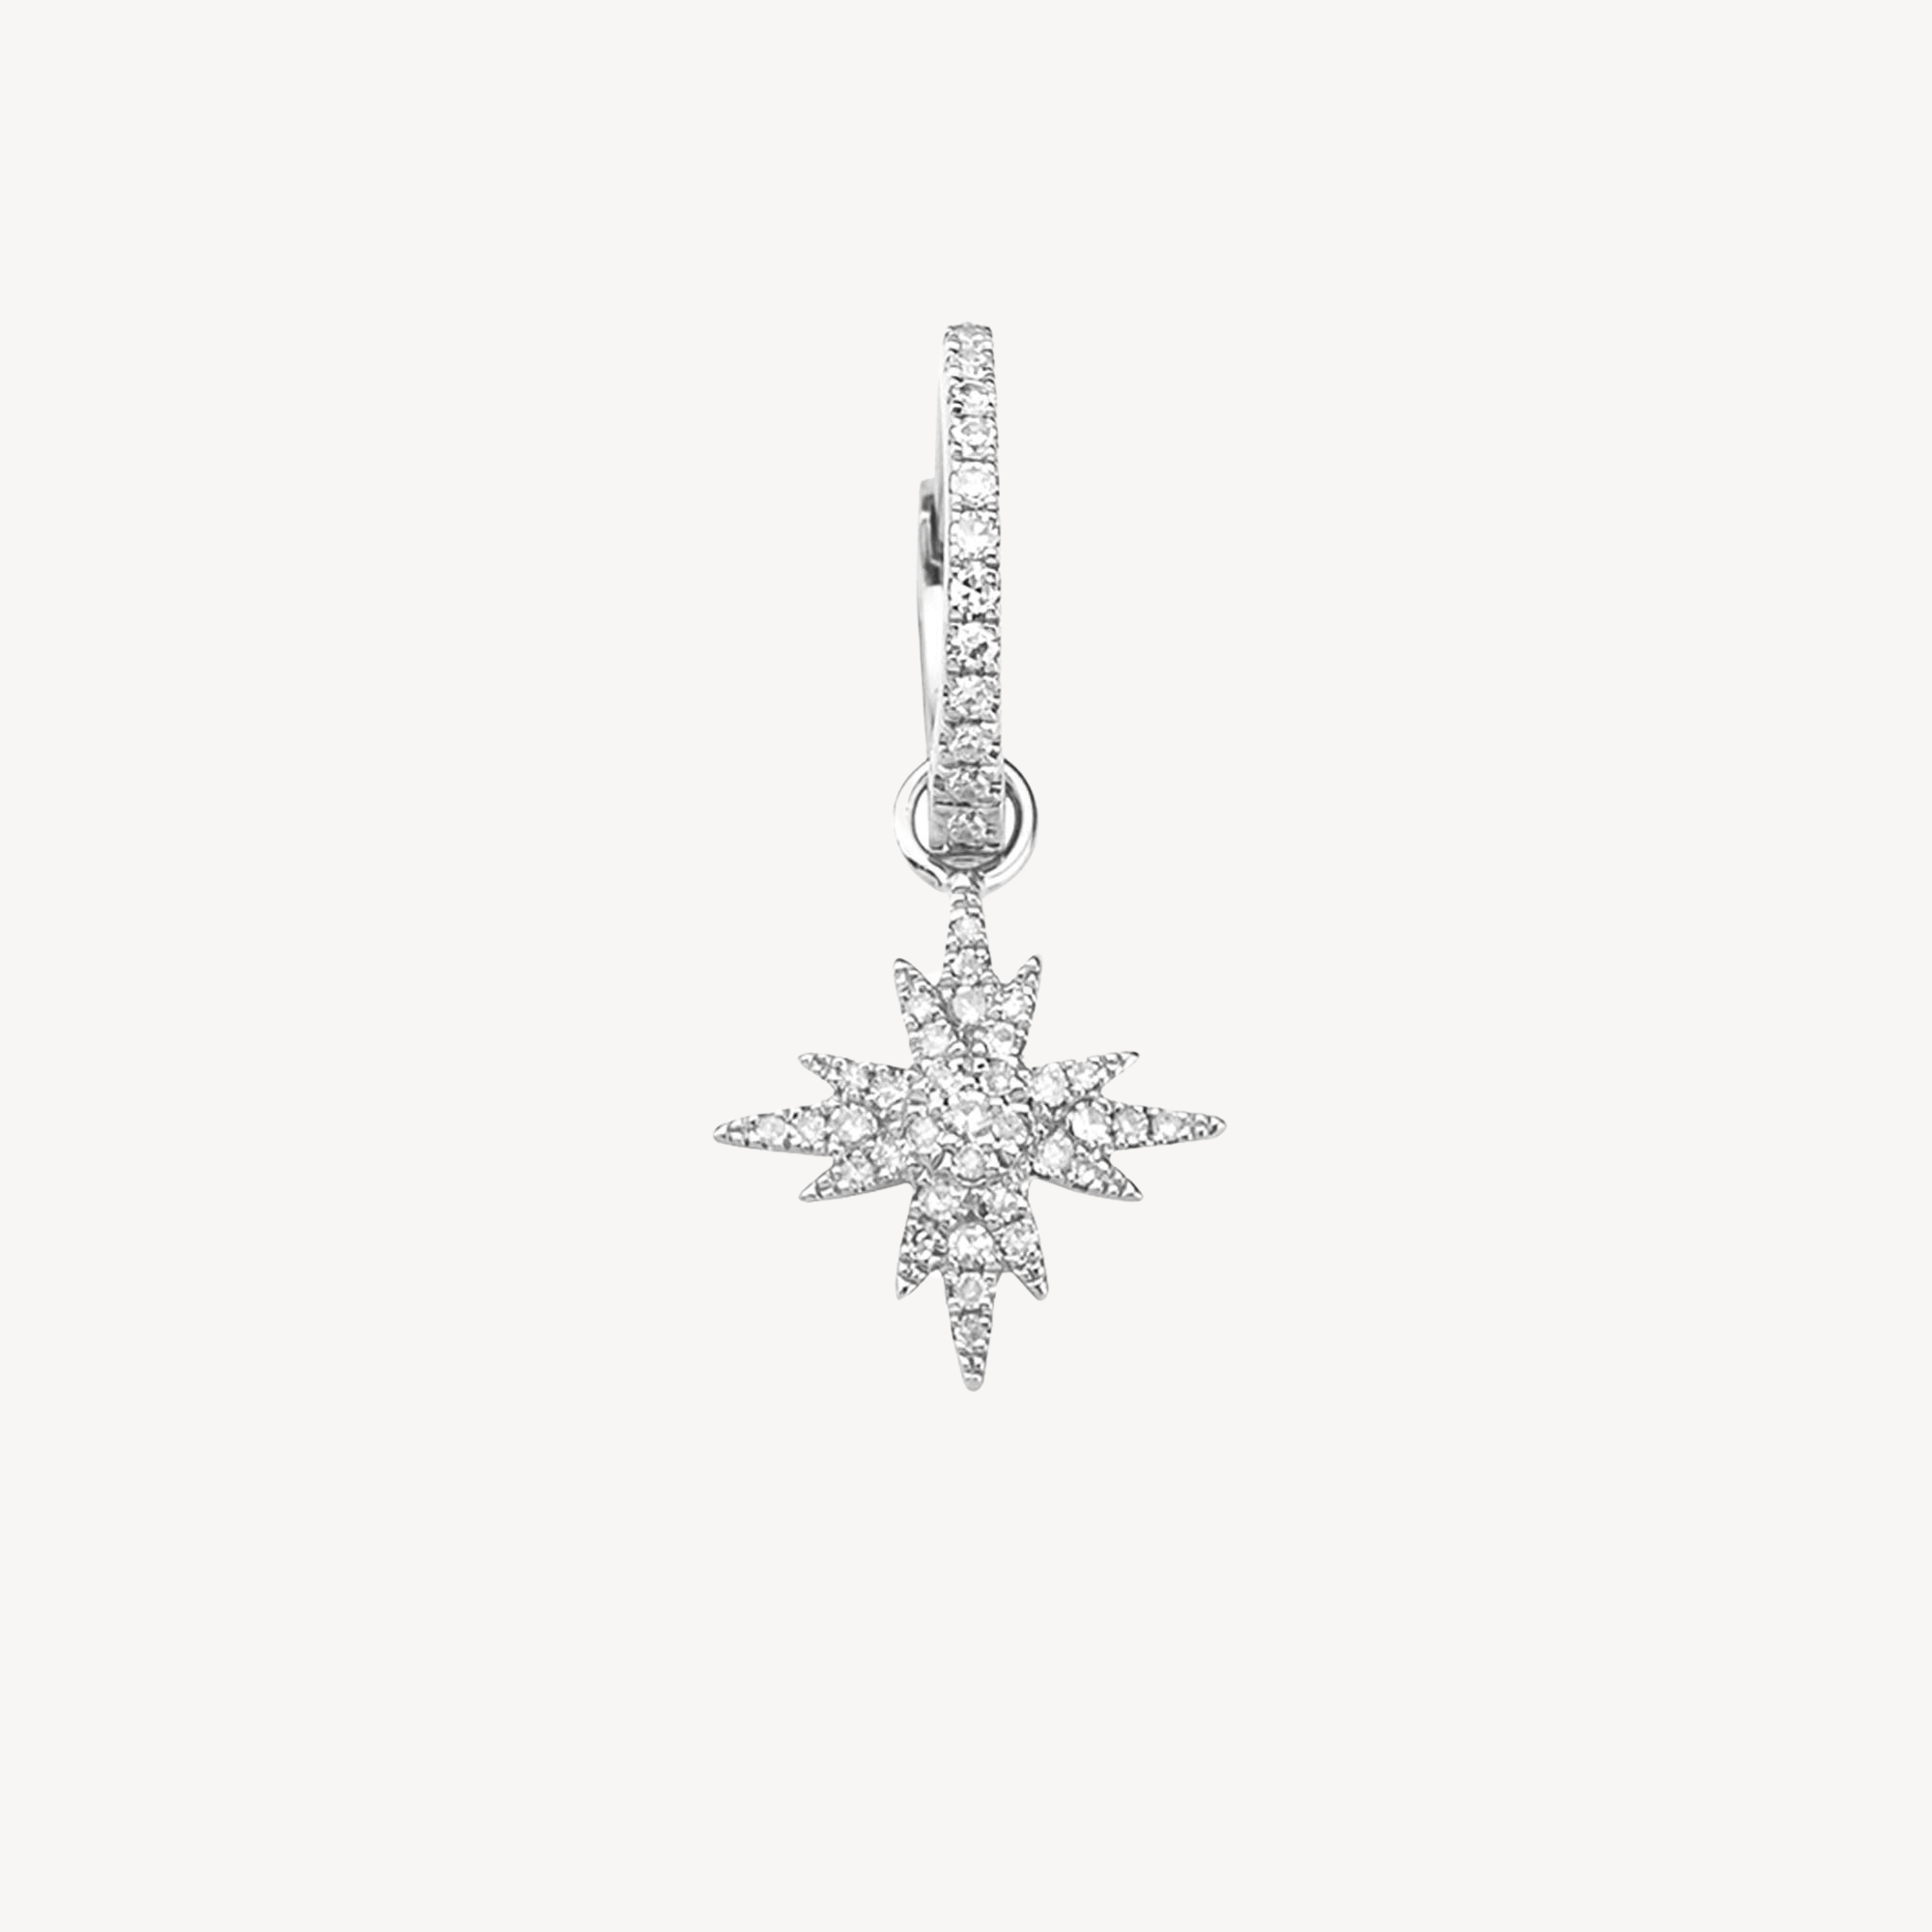 White Gold Delight and Star Earring